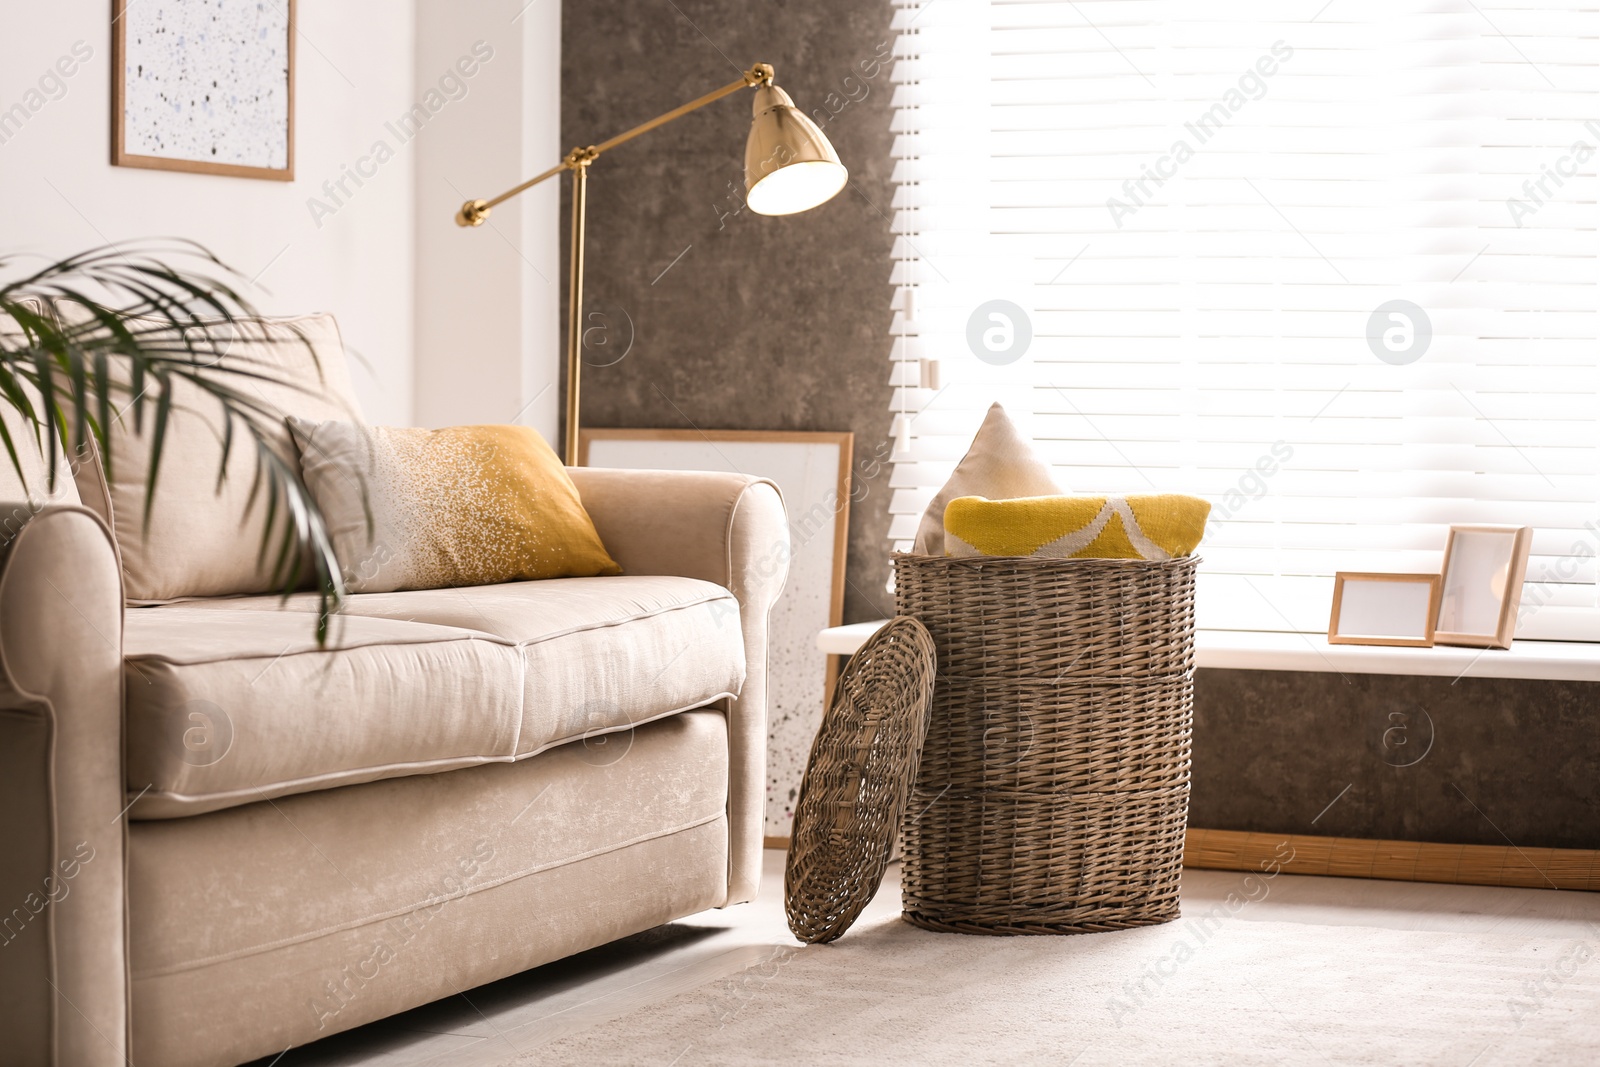 Photo of Basket with soft plaid and pillows in living room interior